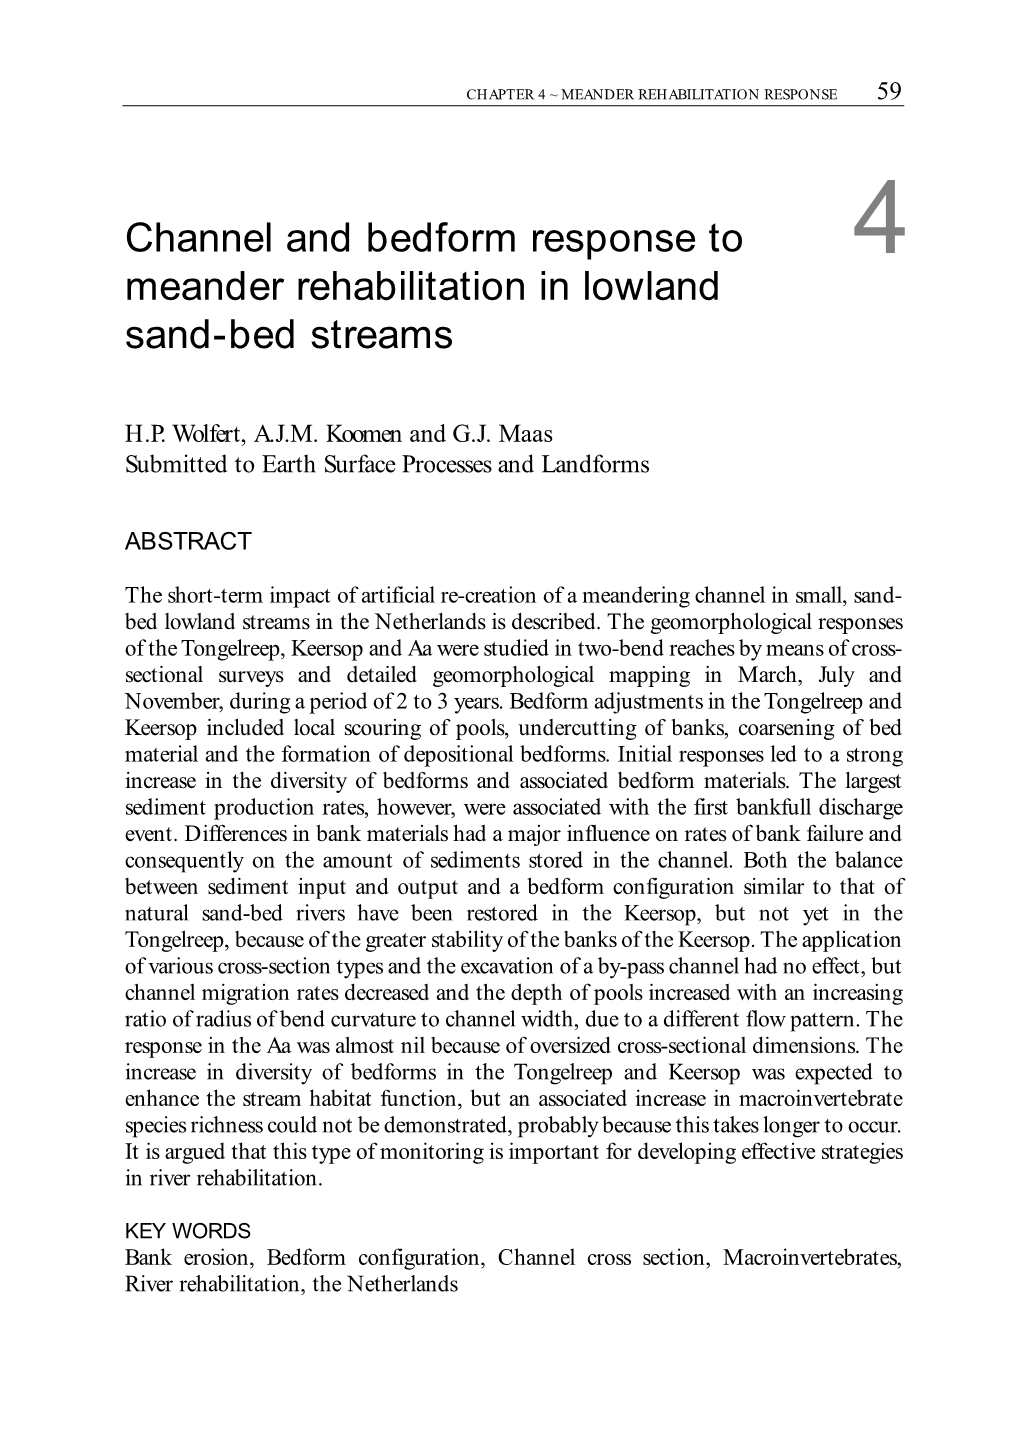 Channel and Bedform Response to Meander Rehabilitation in Lowland